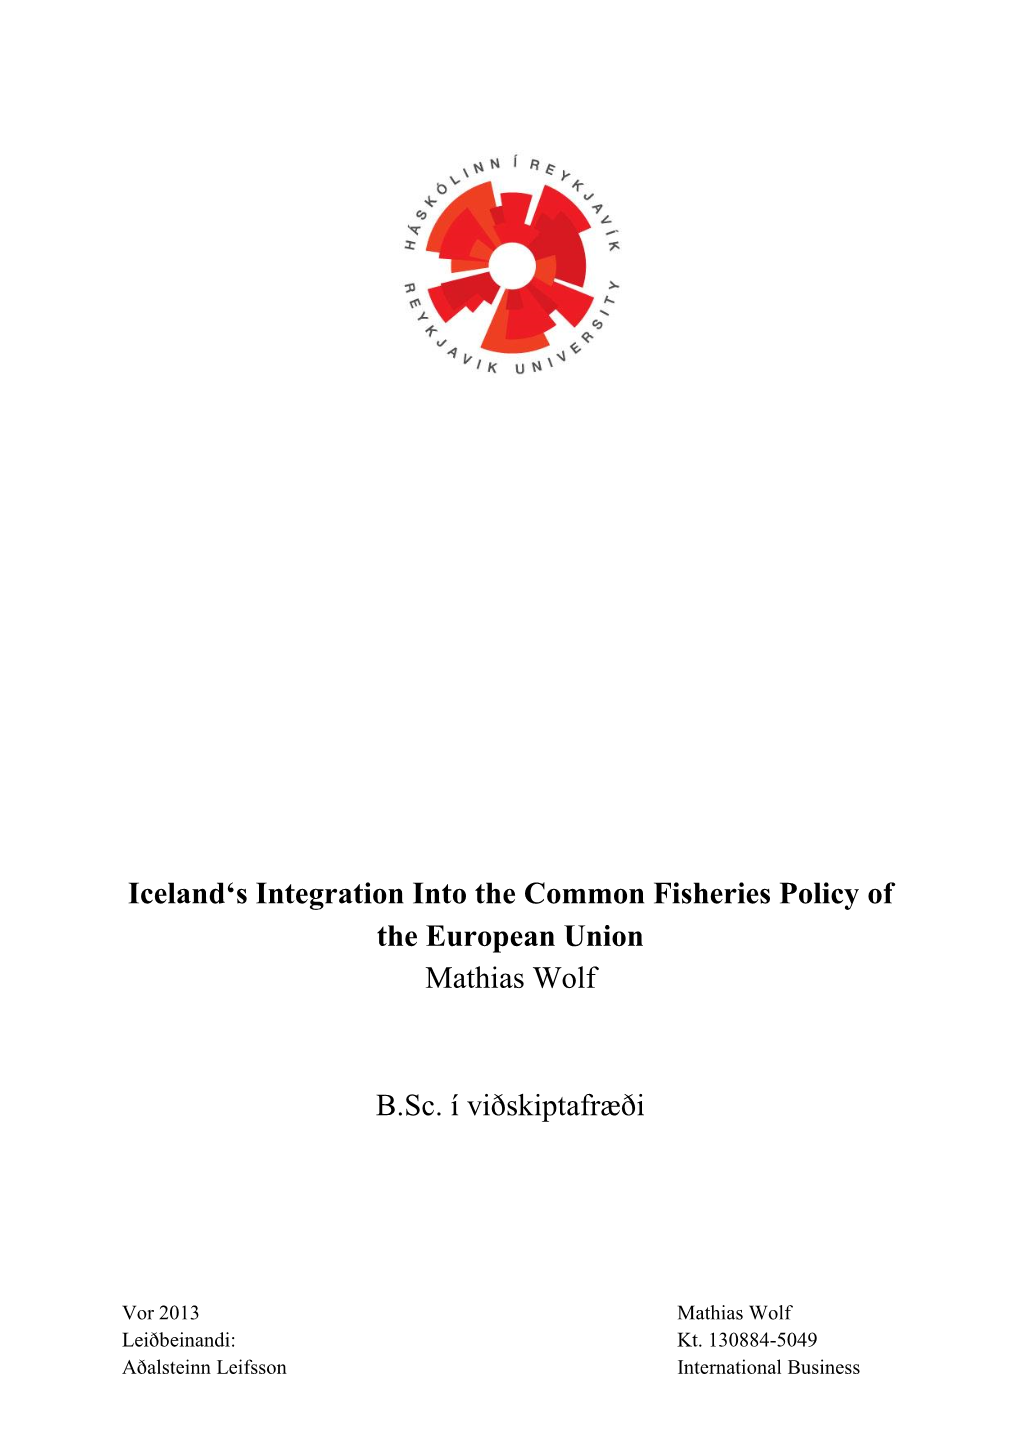 Iceland's Integration Into the Common Fisheries Policy of the European Union